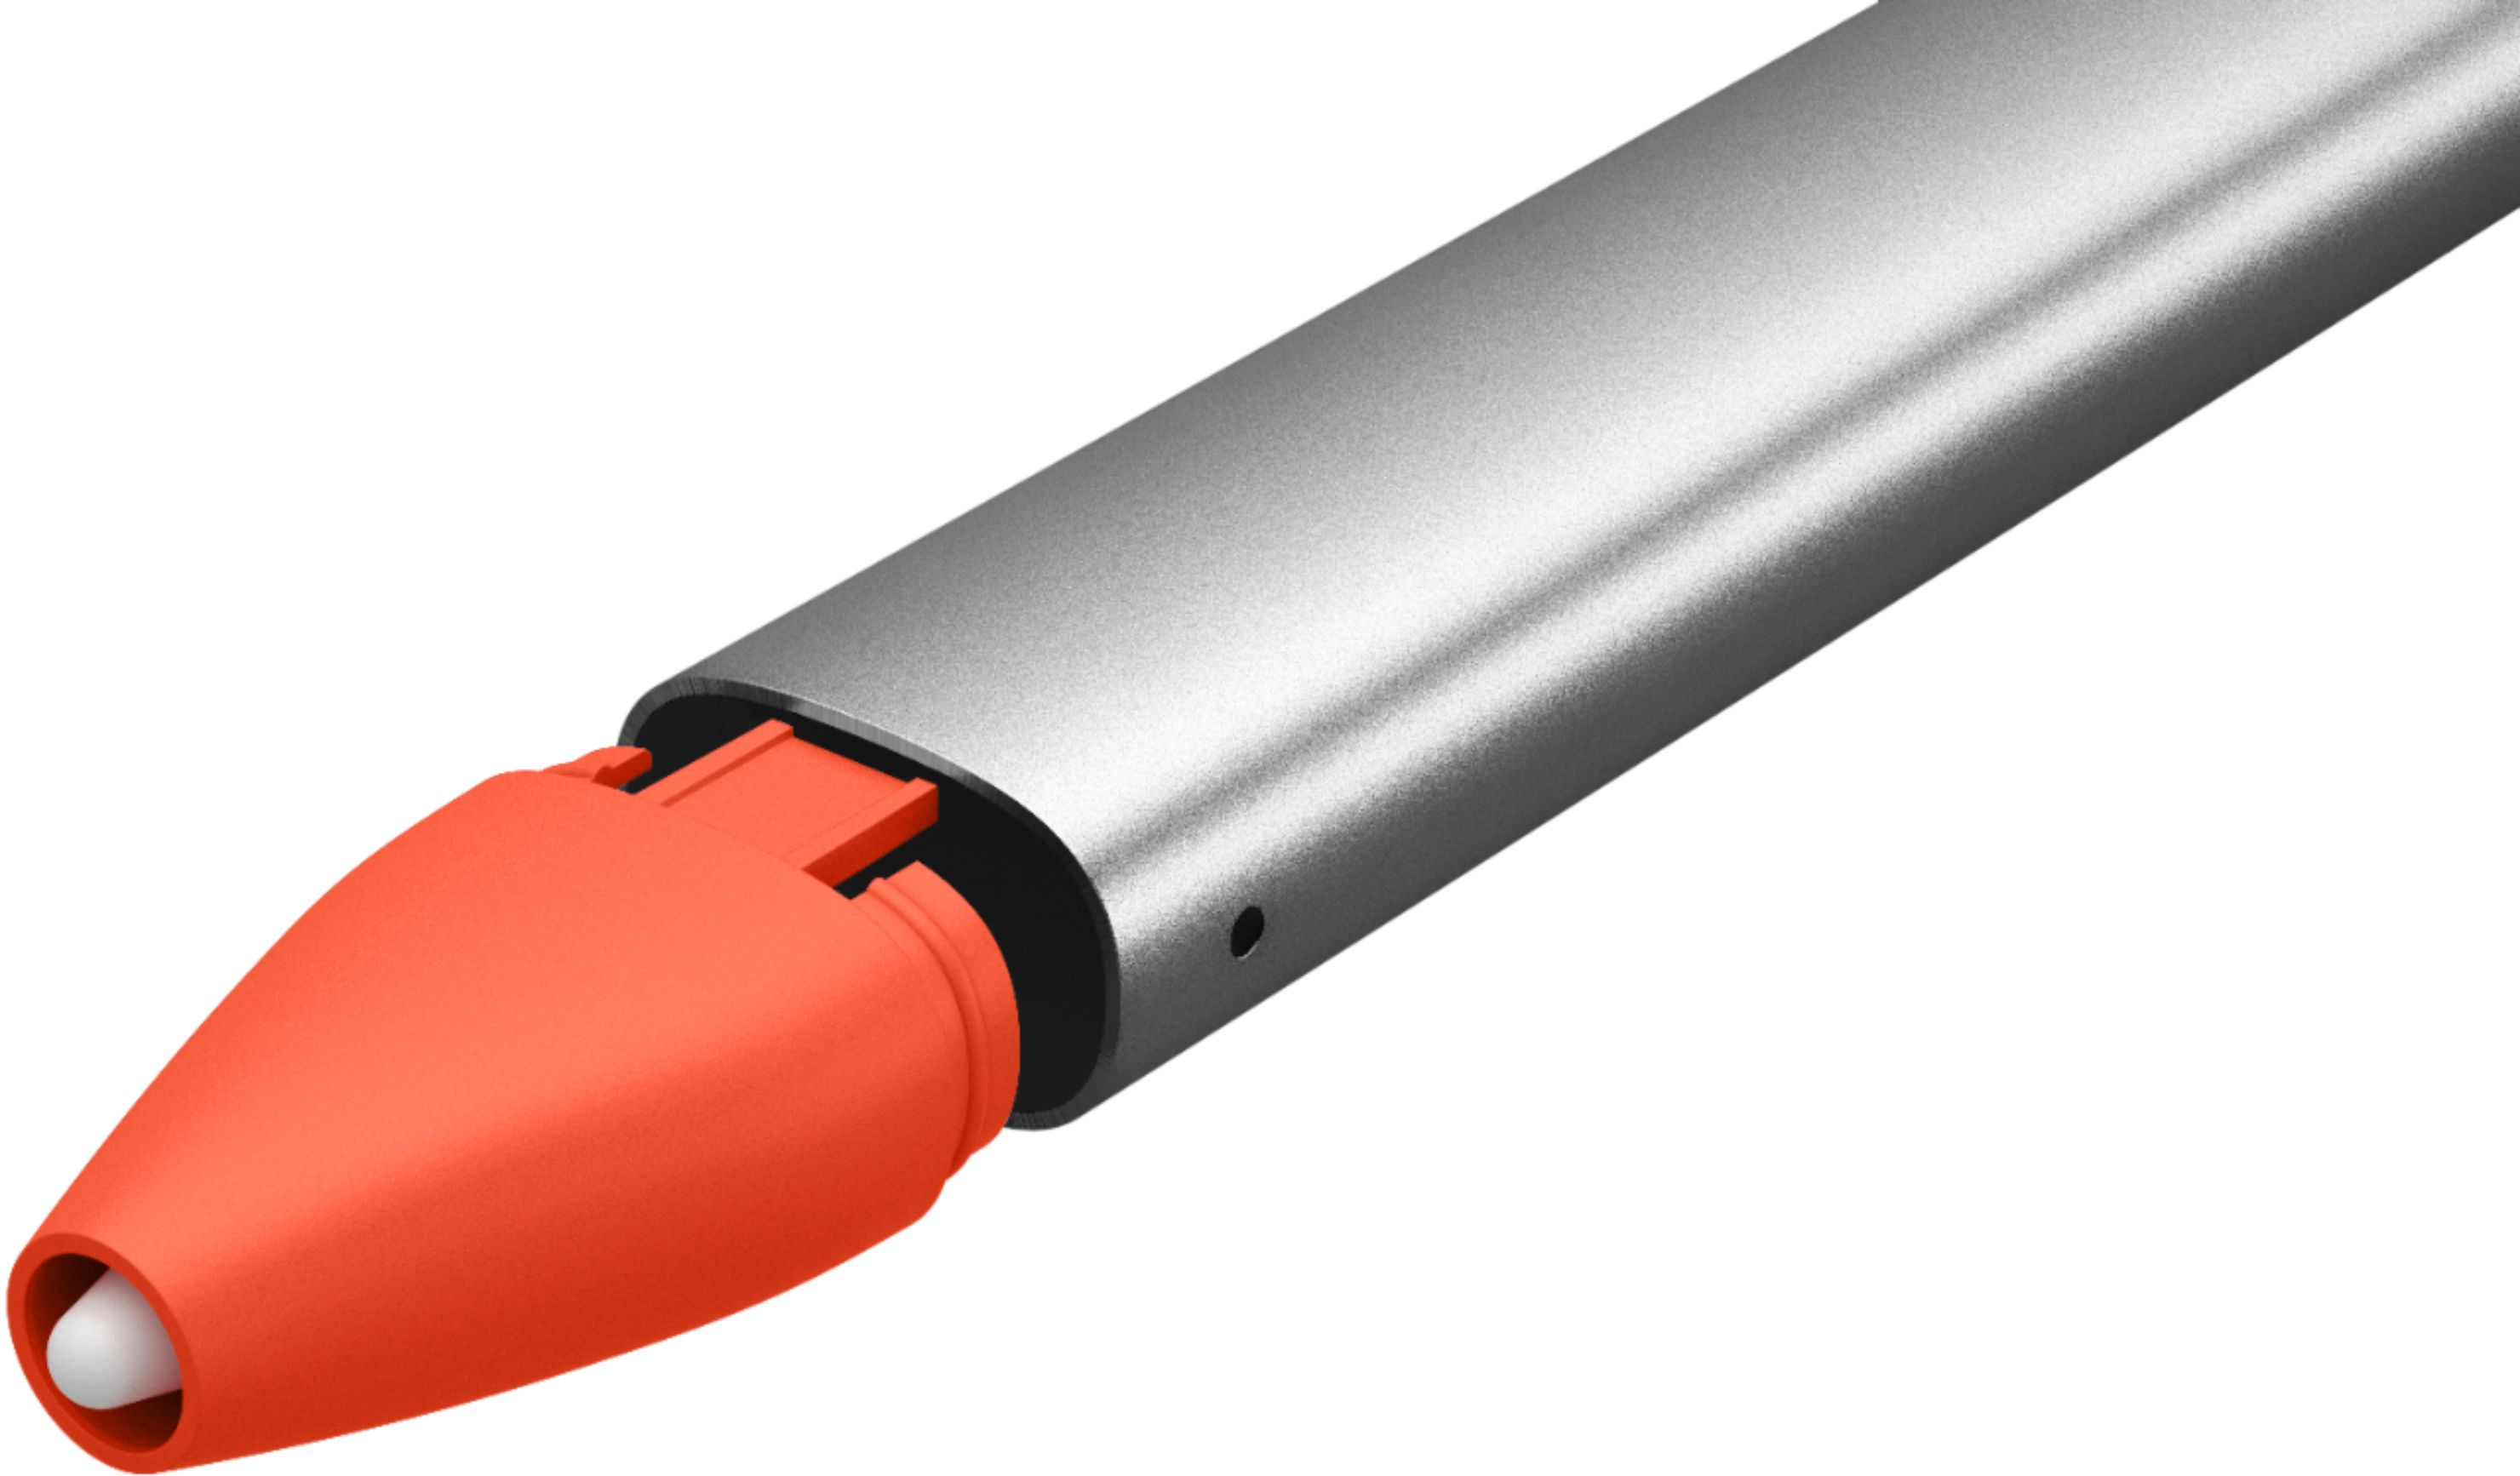 Logitech Crayon Digital Pencil All Apple iPads releases and later) Orange 914-000033 - Best Buy